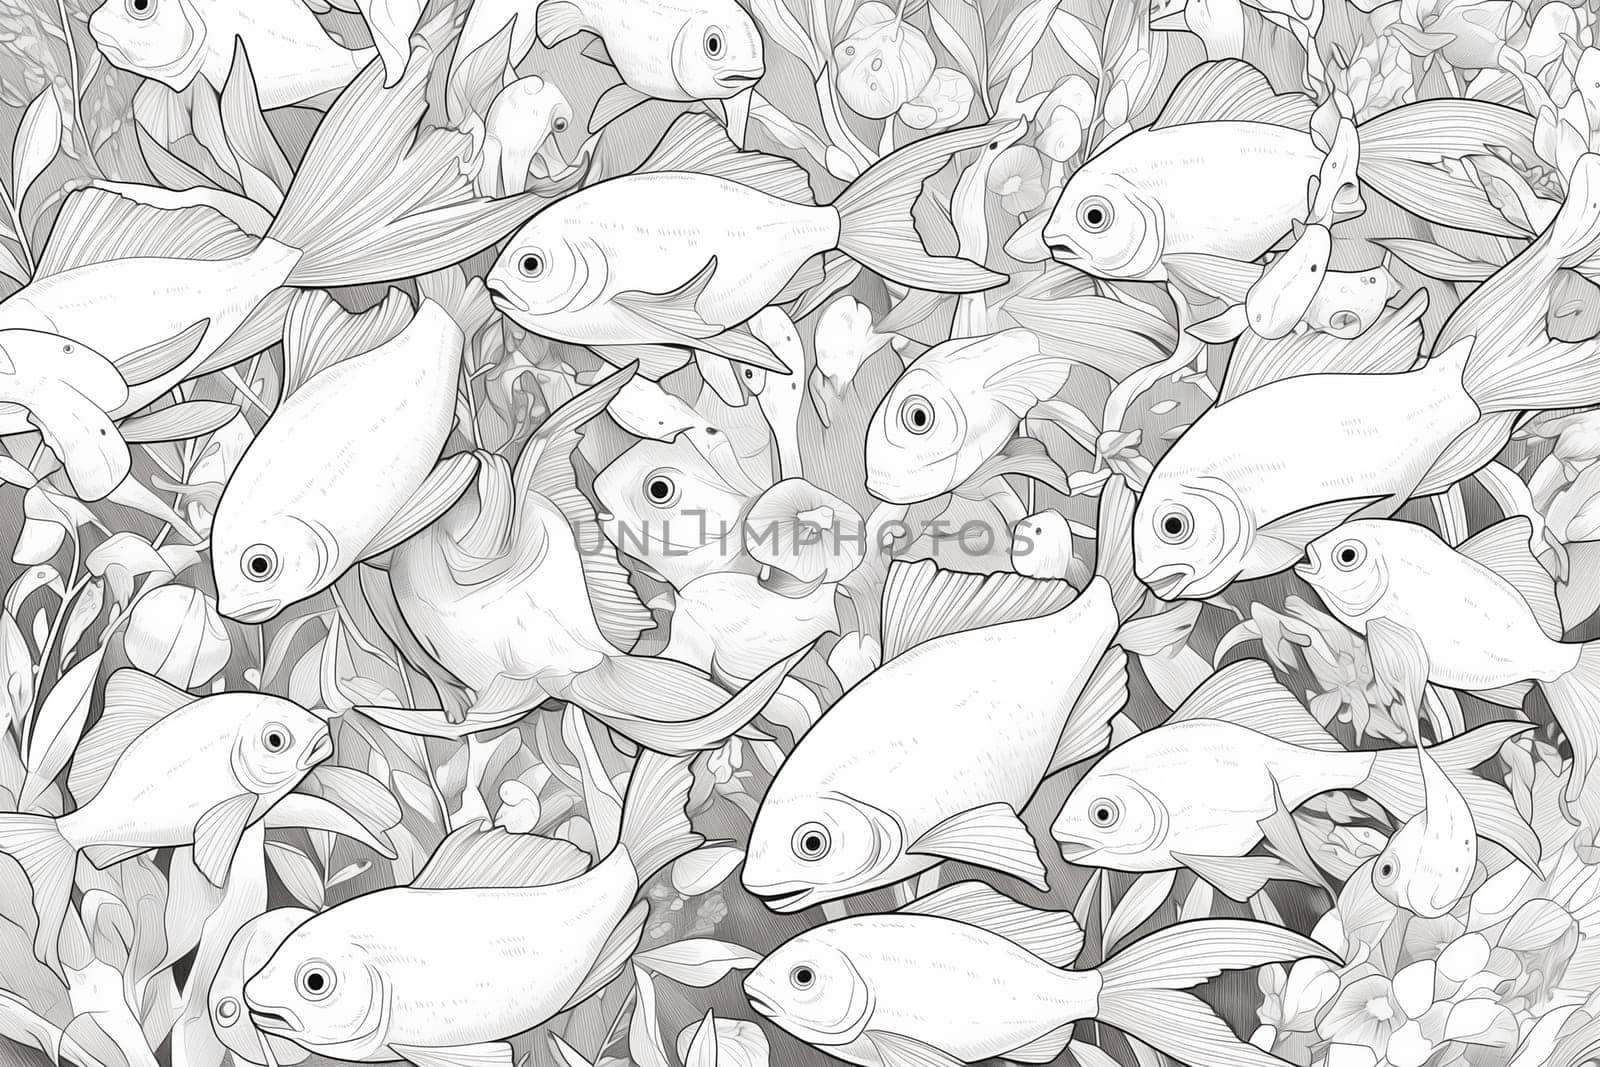 A black and white drawing of fish elegantly swimming in the water, showcasing their fluid movements and unique shapes.